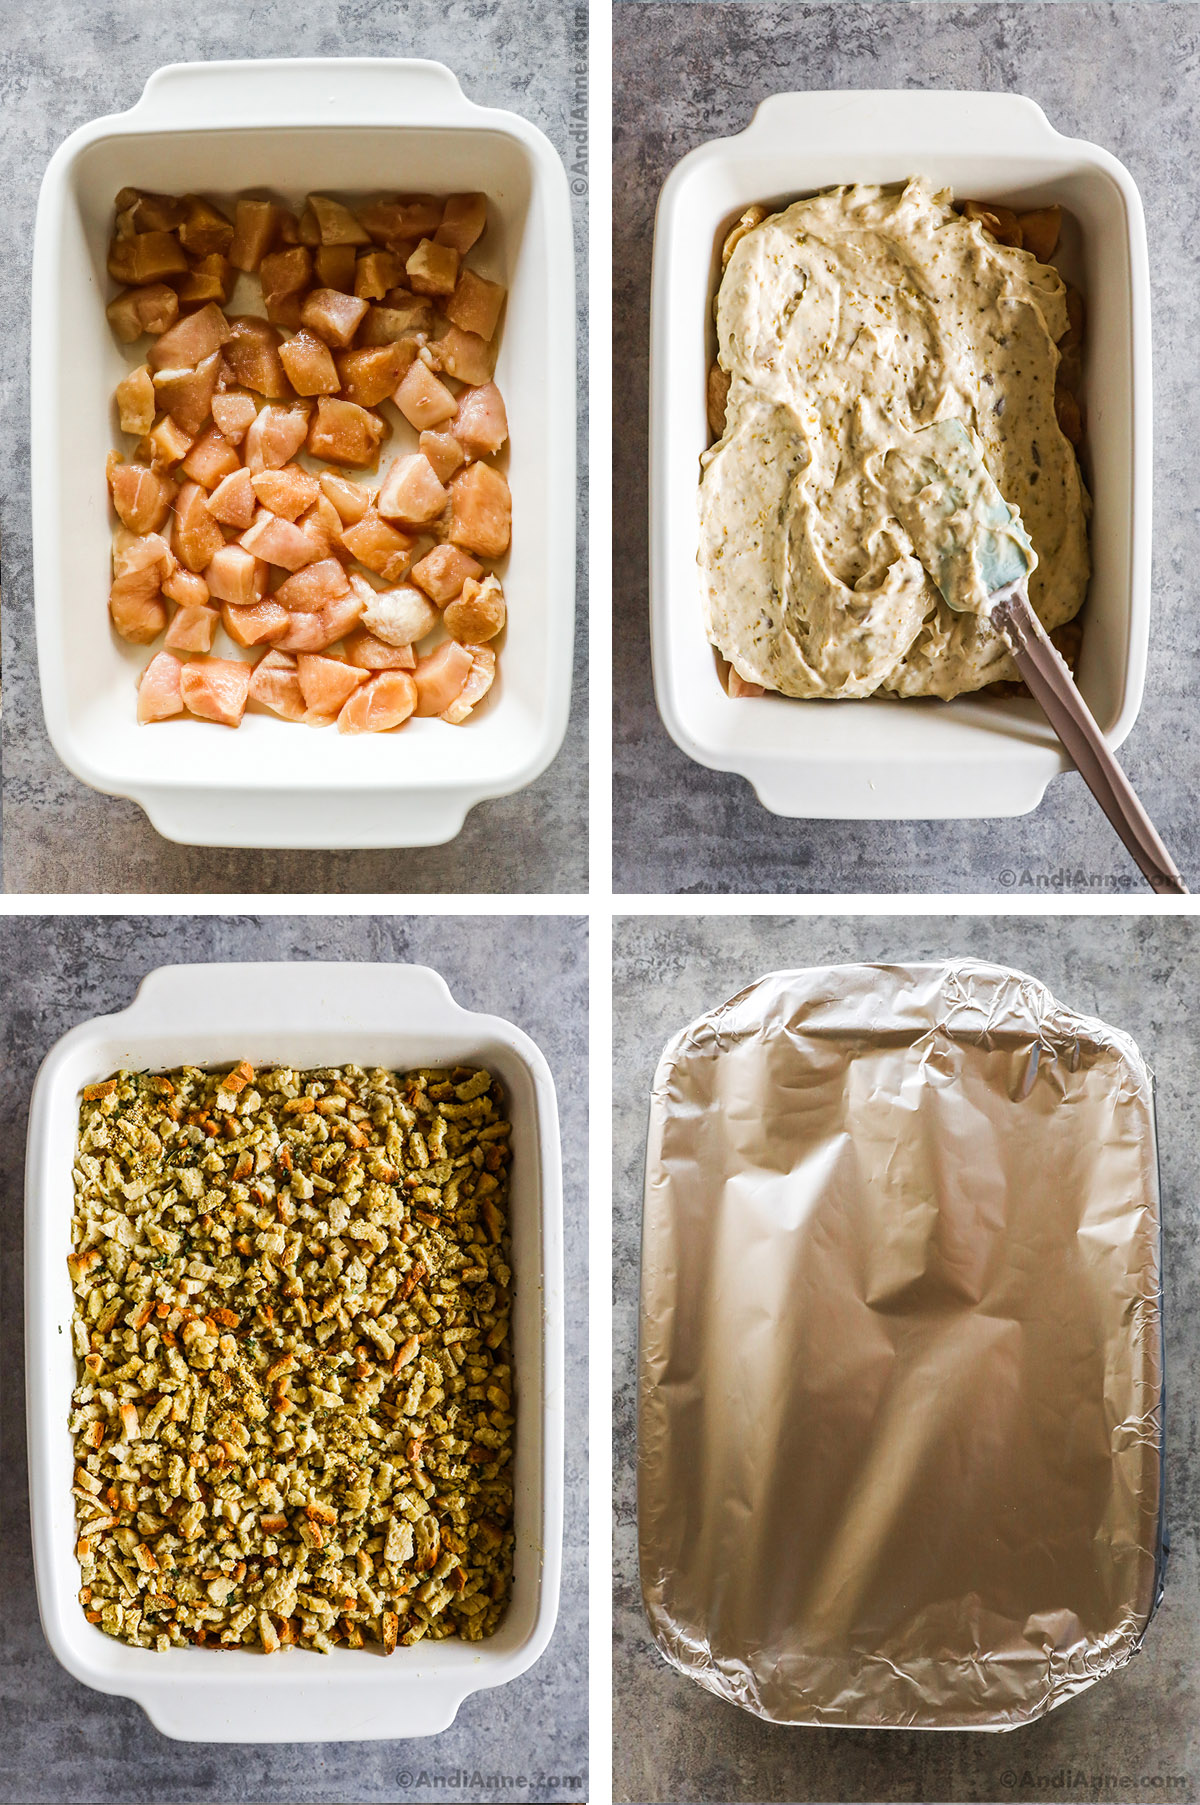 Four images showing steps to make recipe. First is chopped chicken pieces in baking dish, second is creamy sauce poured overtop of chicken, third is stuffing poured on top, fourth is foil covering the baking dish.